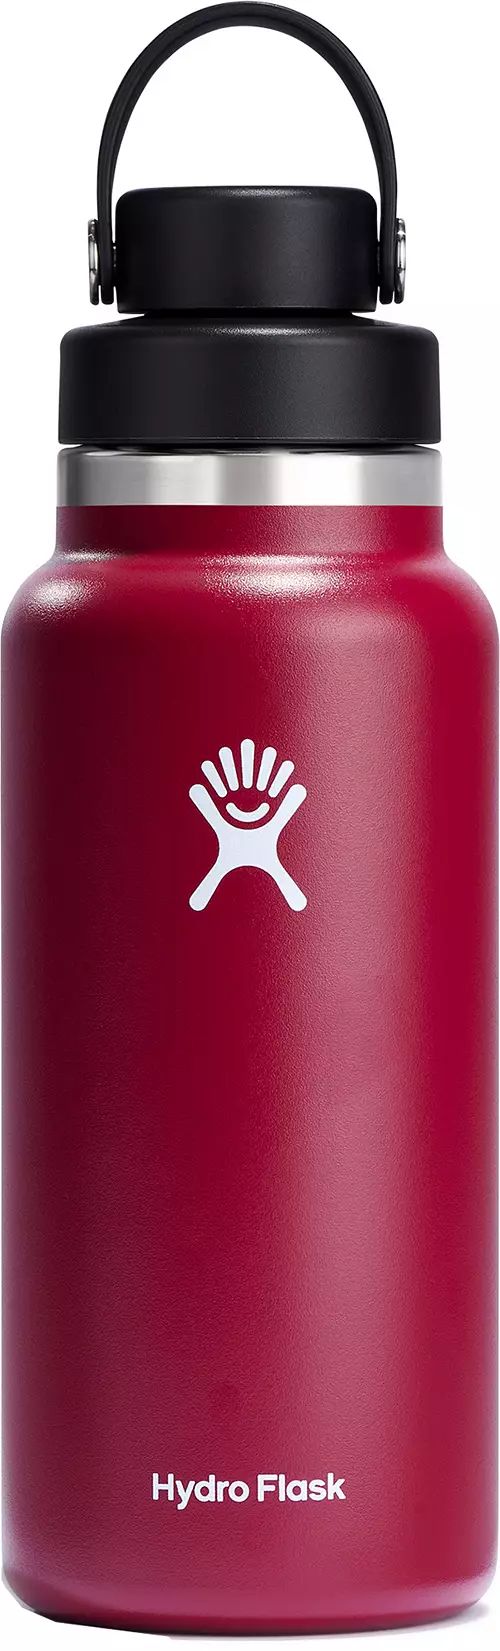 Hydro Flask 32 oz. Wide Mouth Bottle with Flex Chug Cap | Dick's Sporting Goods